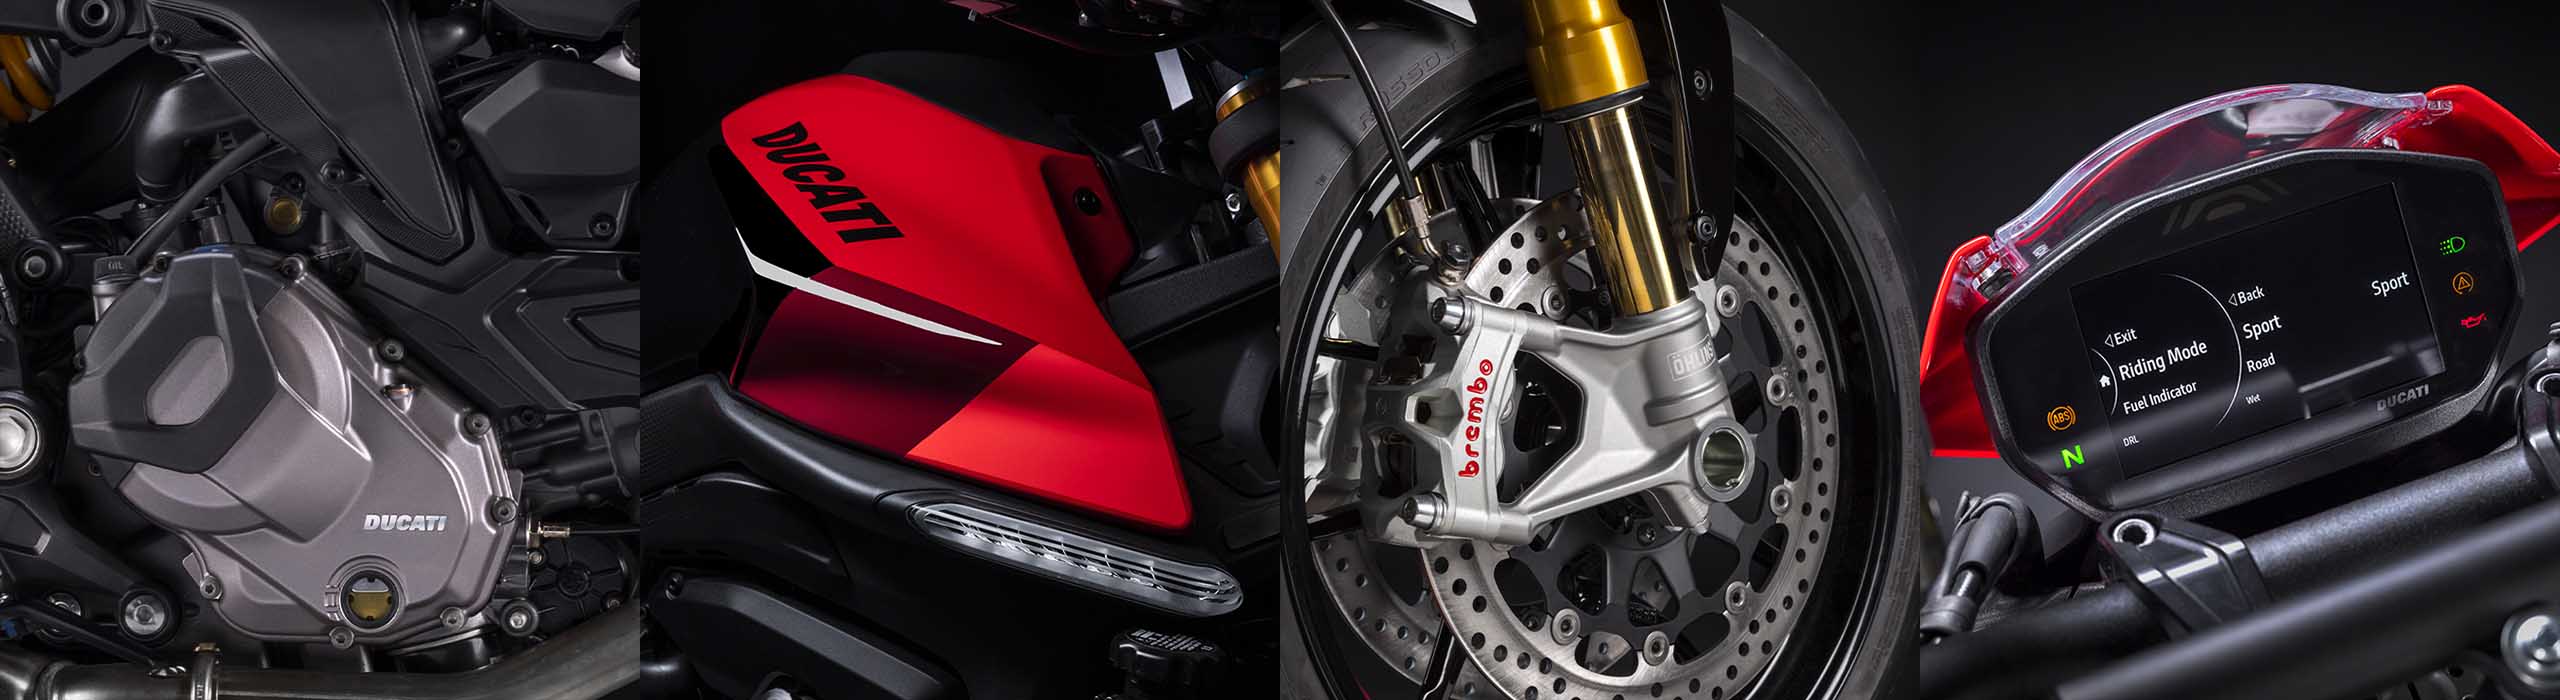 Ducati Monster SP Featuring Collage